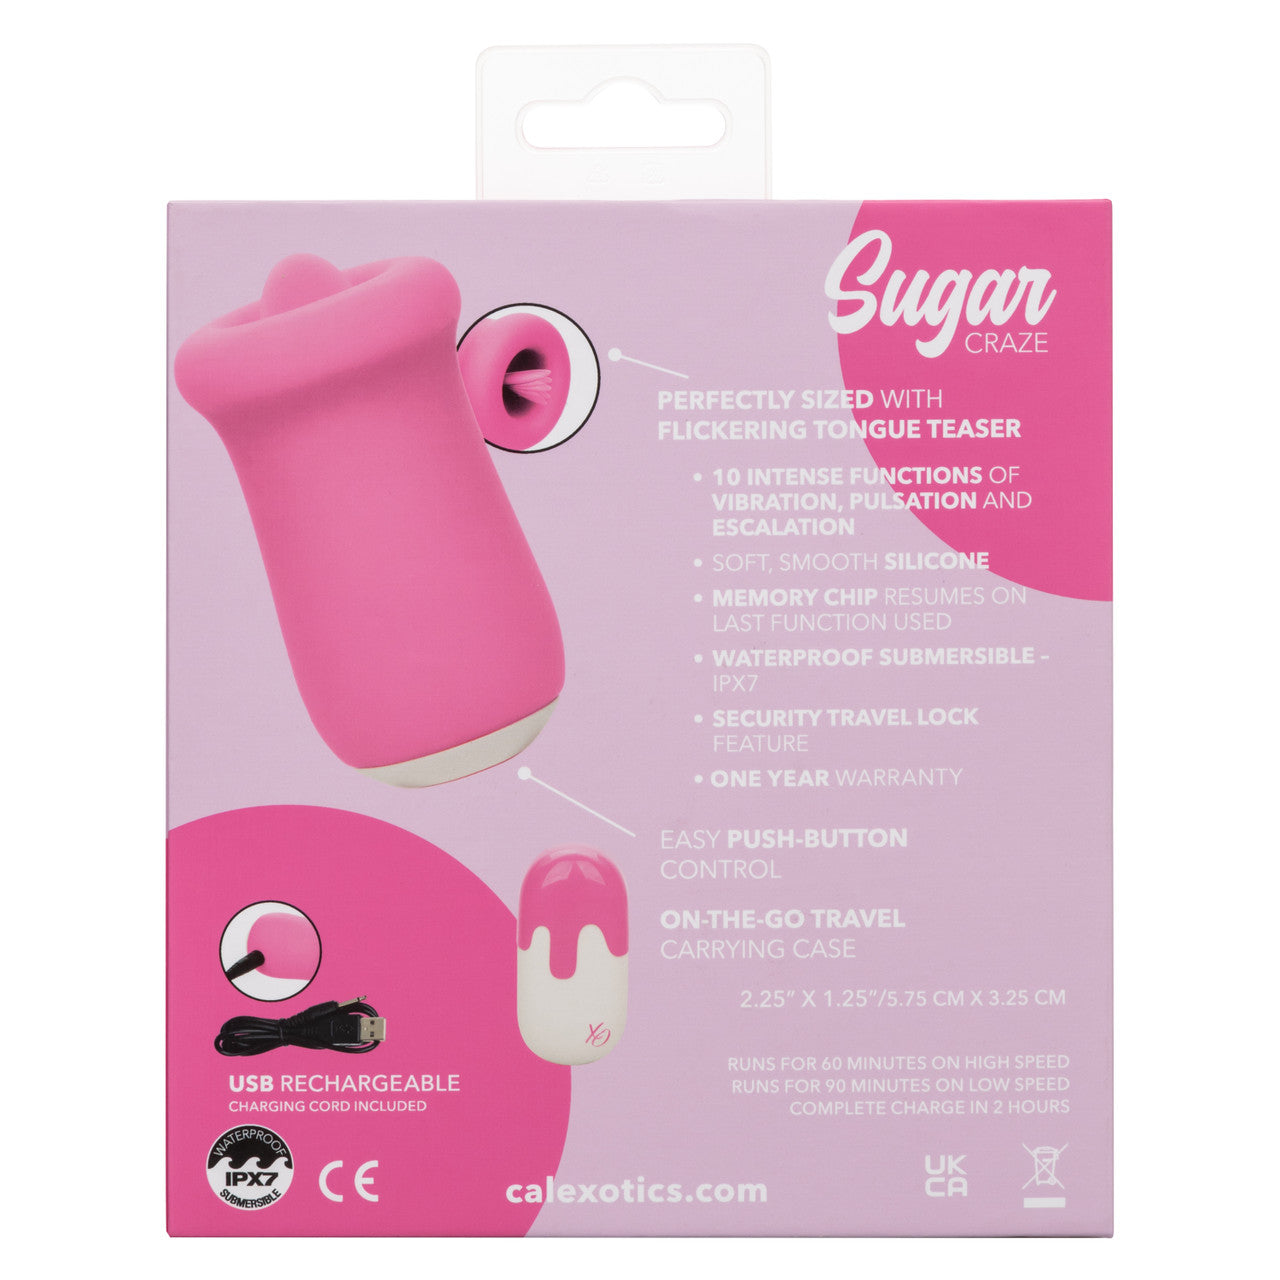 Sugar Craze (with carrying case)